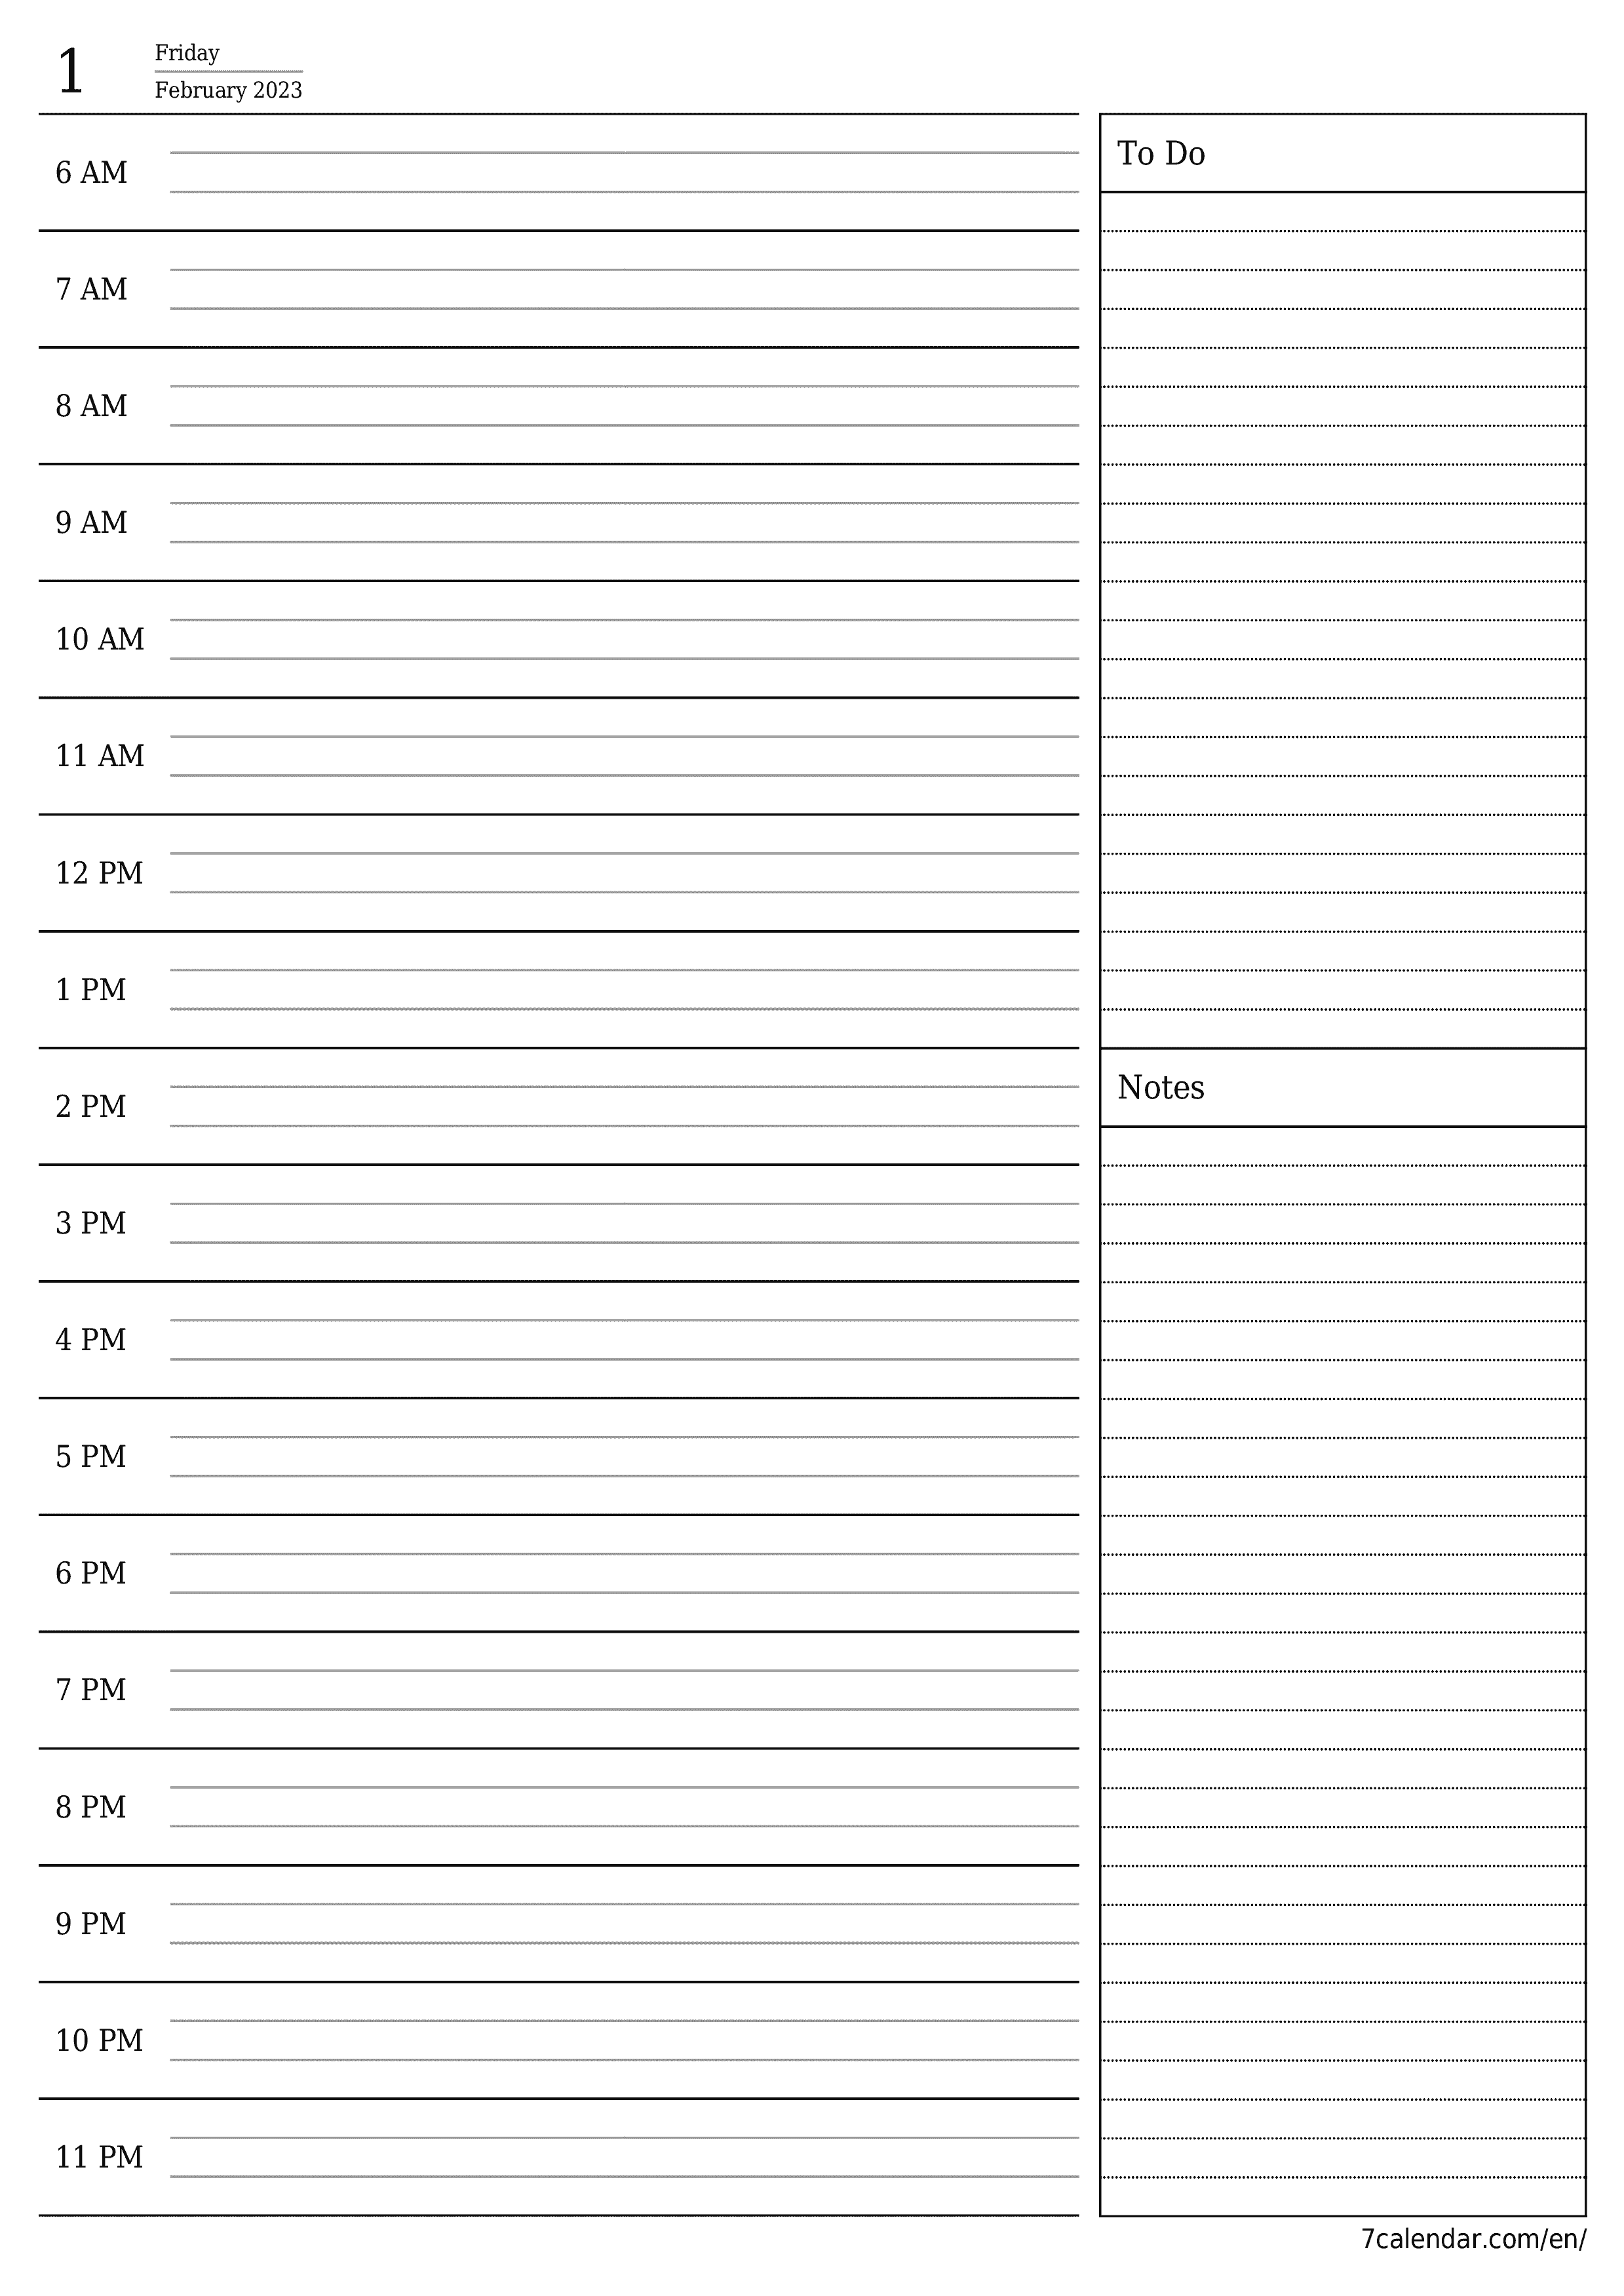 Blank daily printable calendar and planner for day February 2023 with notes, save and print to PDF PNG English - 7calendar.com